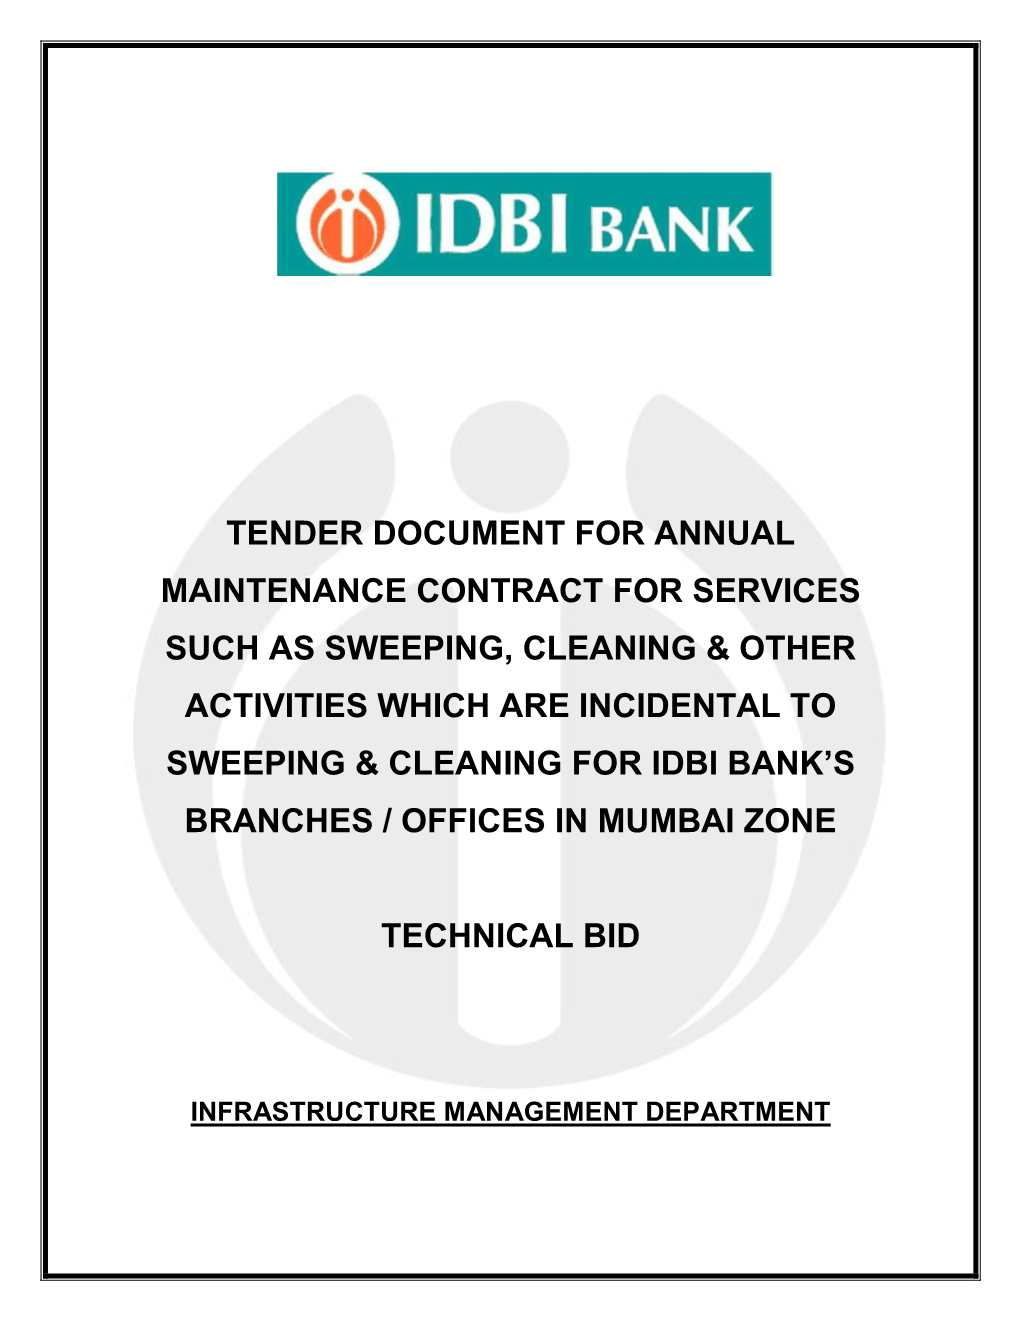 Tender Document for Annual Maintenance Contract For